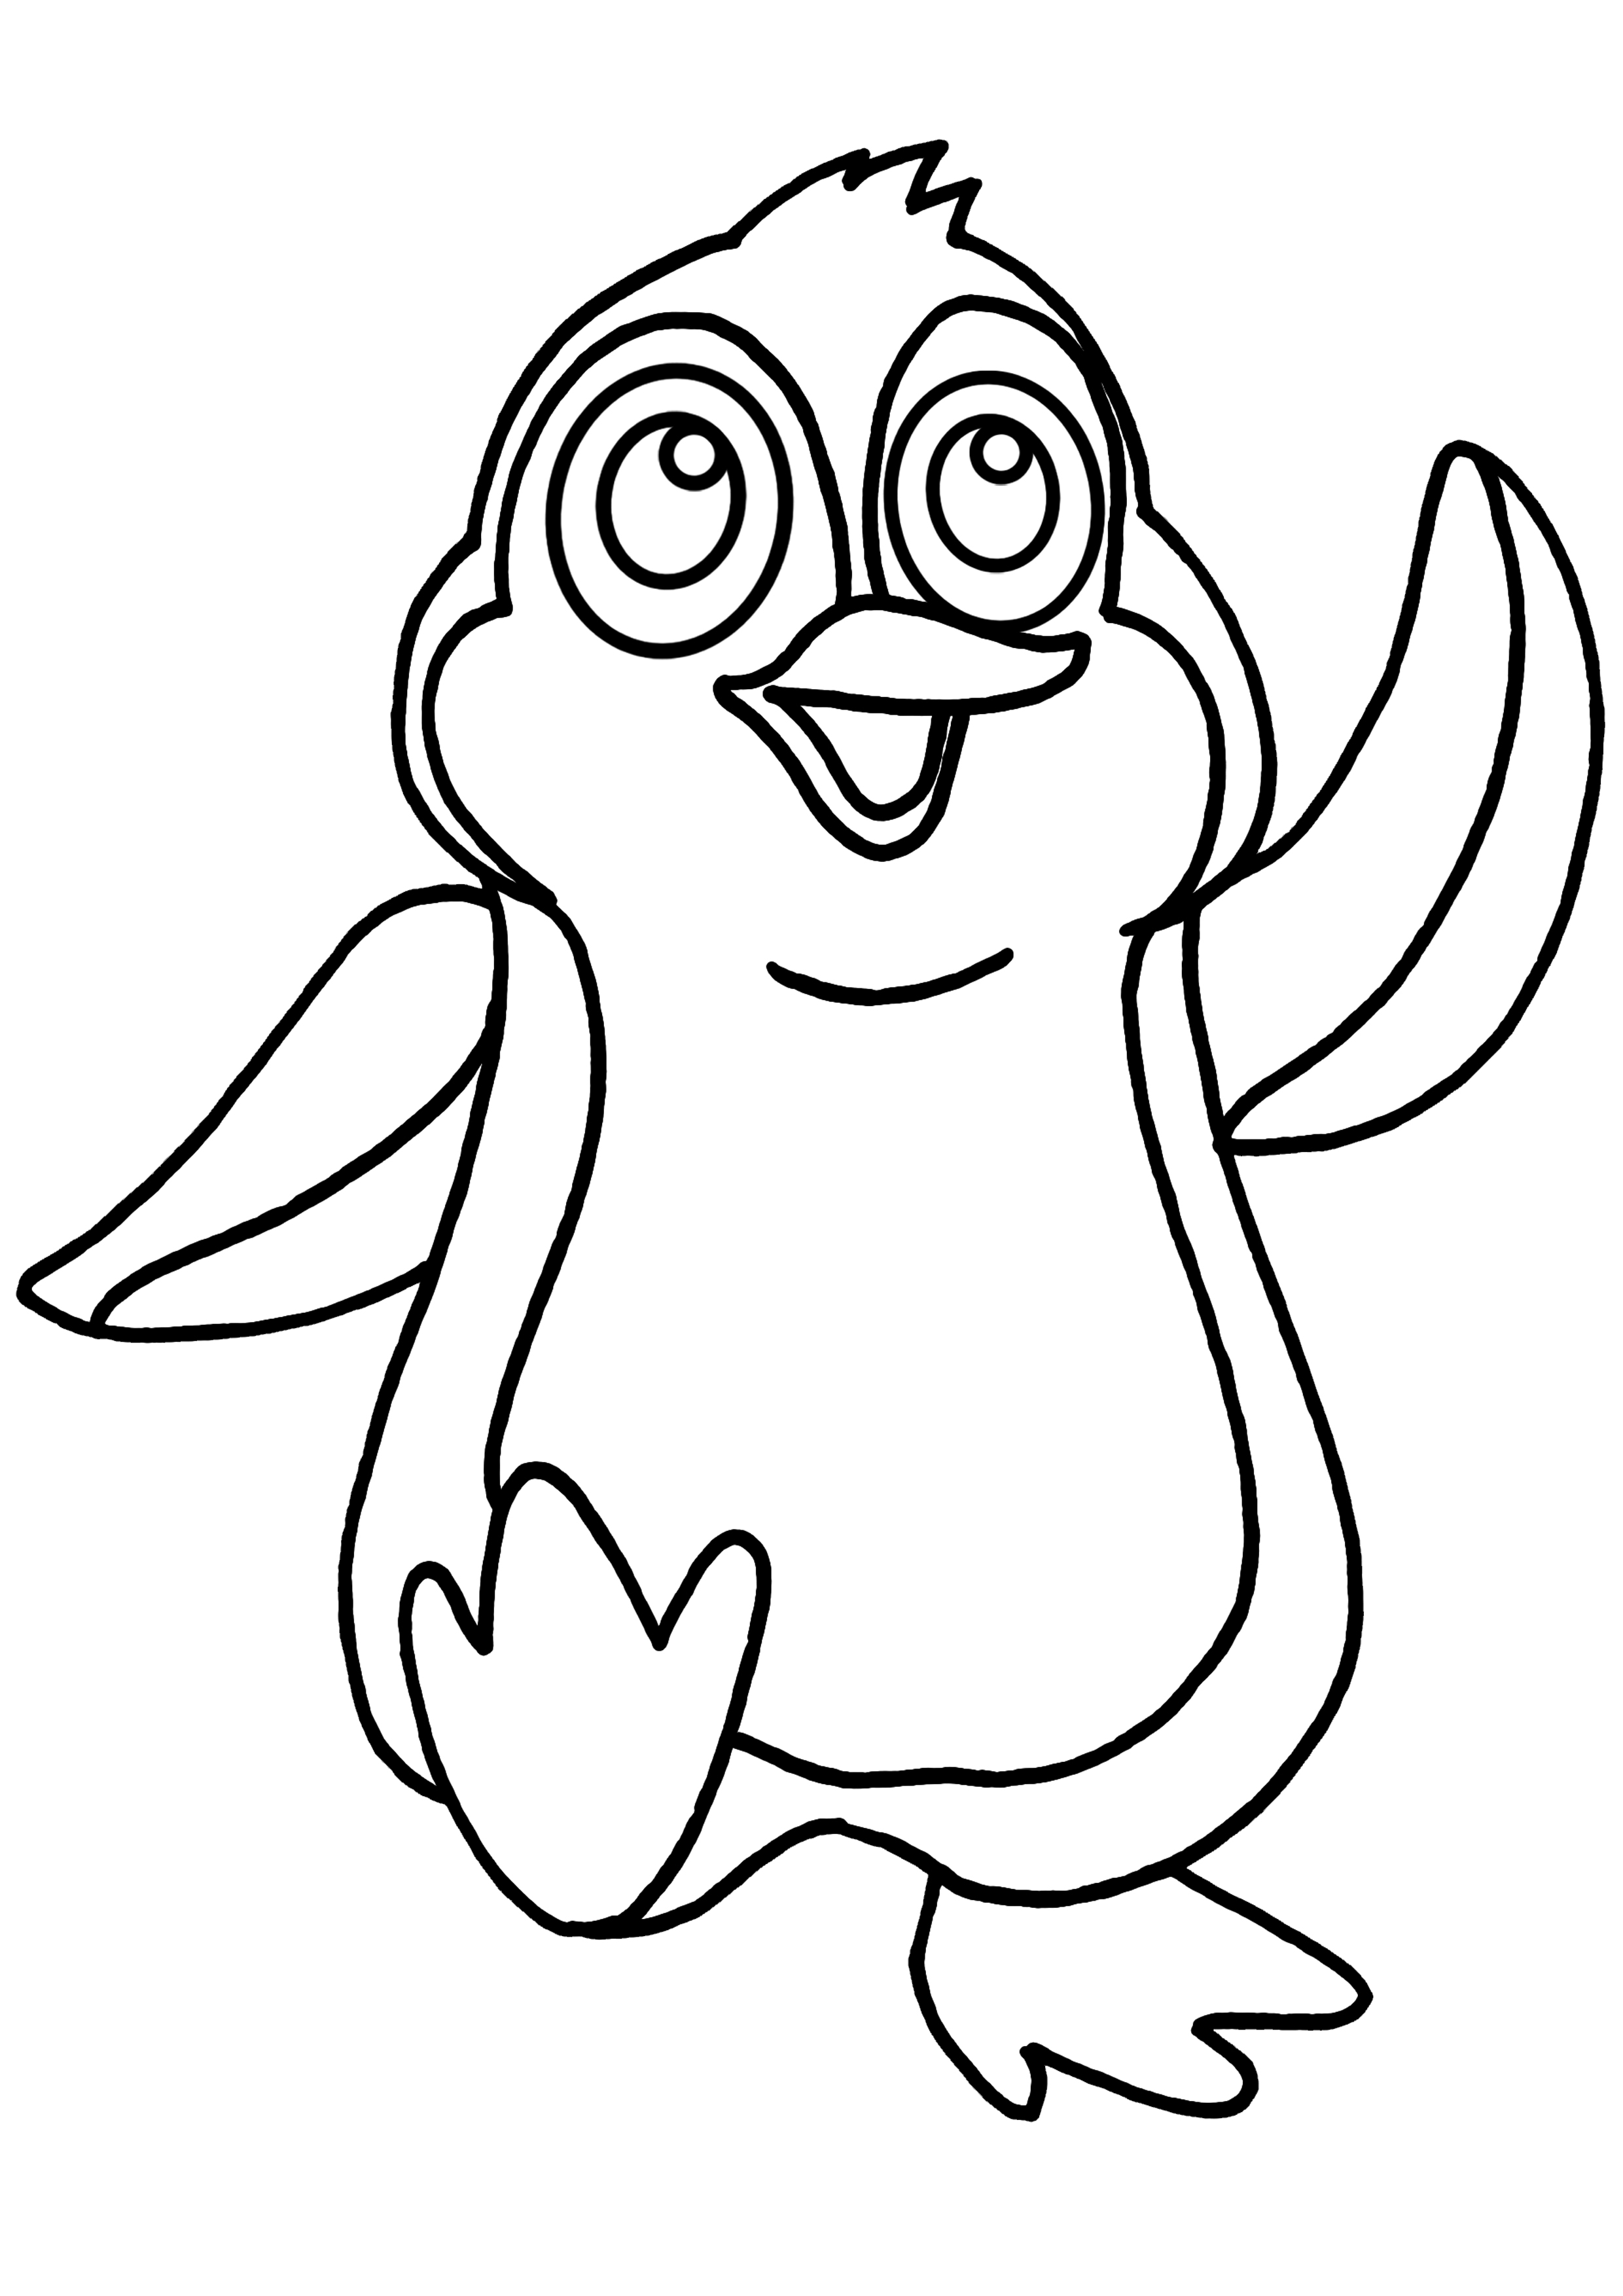 penguin-coloring-pages-printable-printable-world-holiday